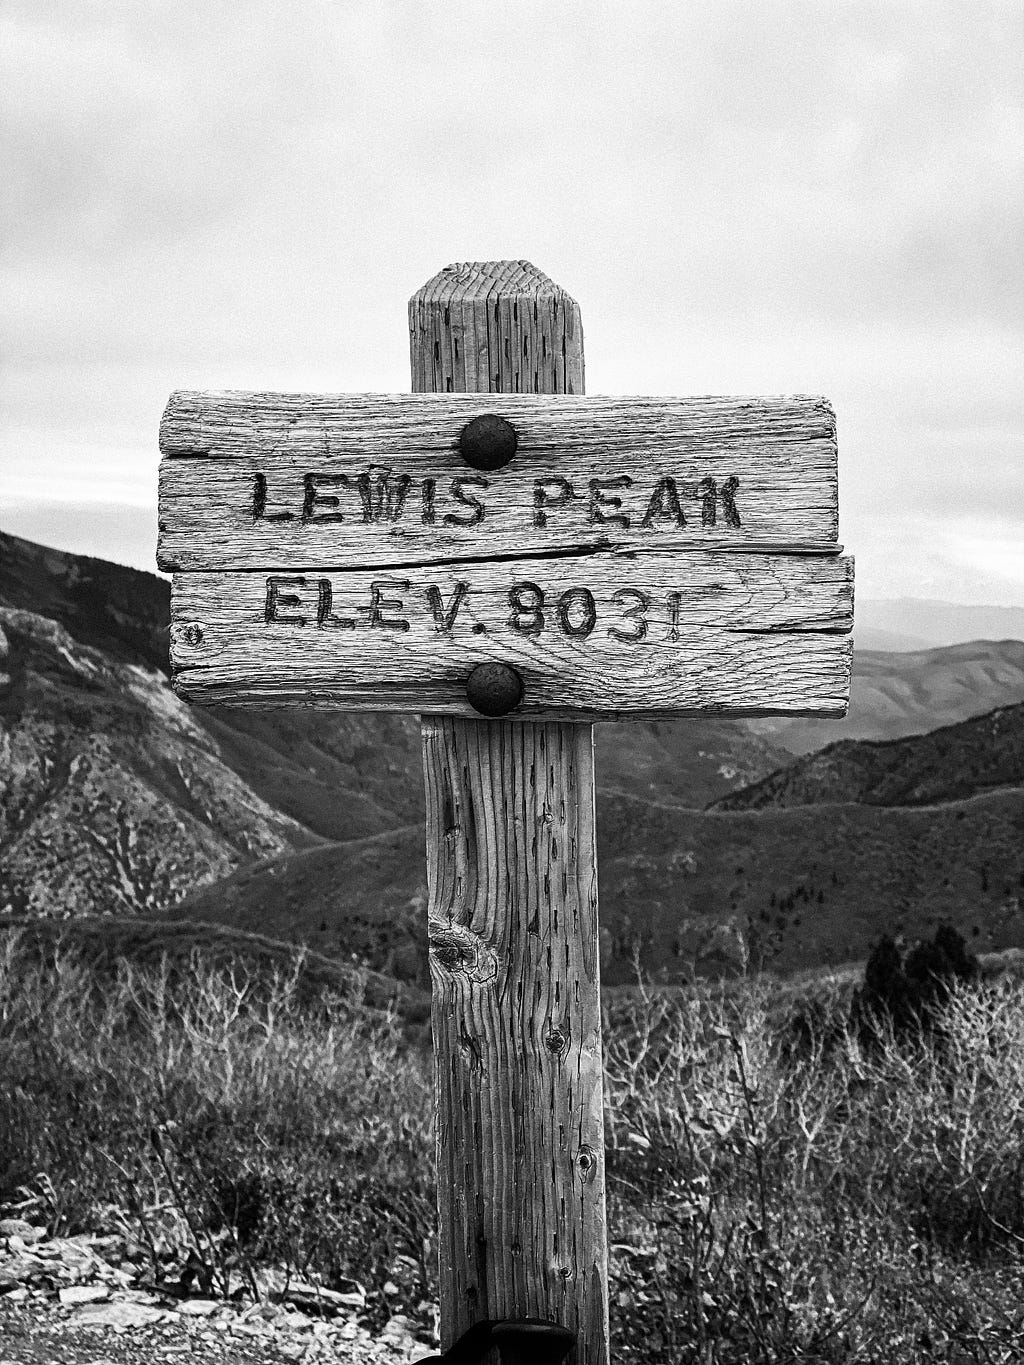 Sign at Lewis Peak (photo by author)